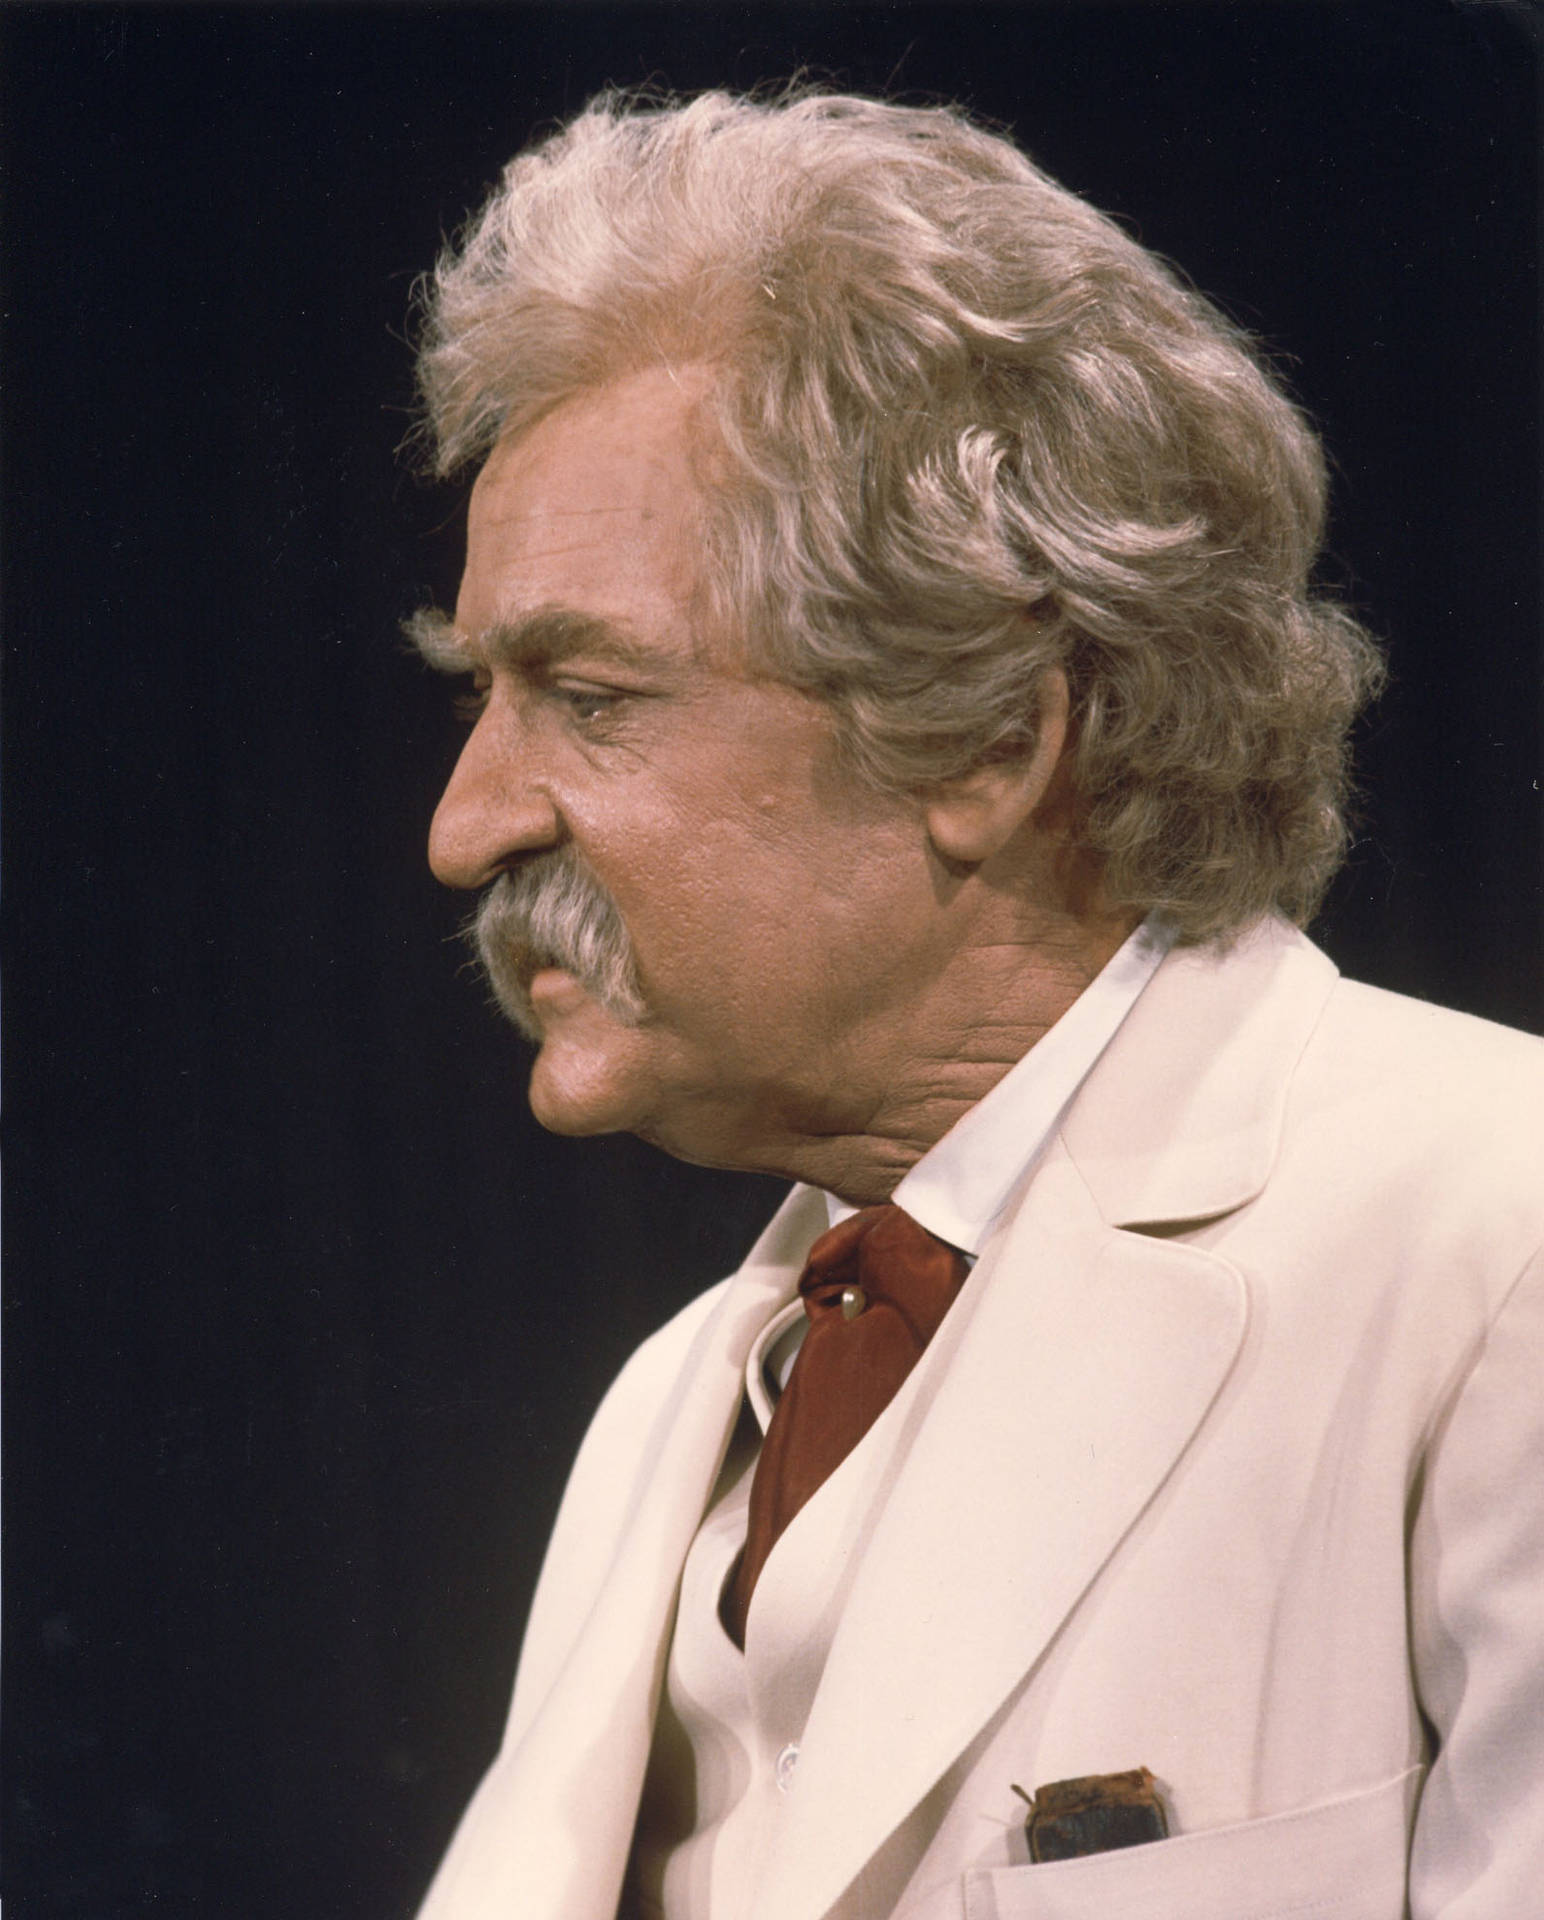 Legendary actor Hal Holbrook in a thought-provoking side view pose. Wallpaper